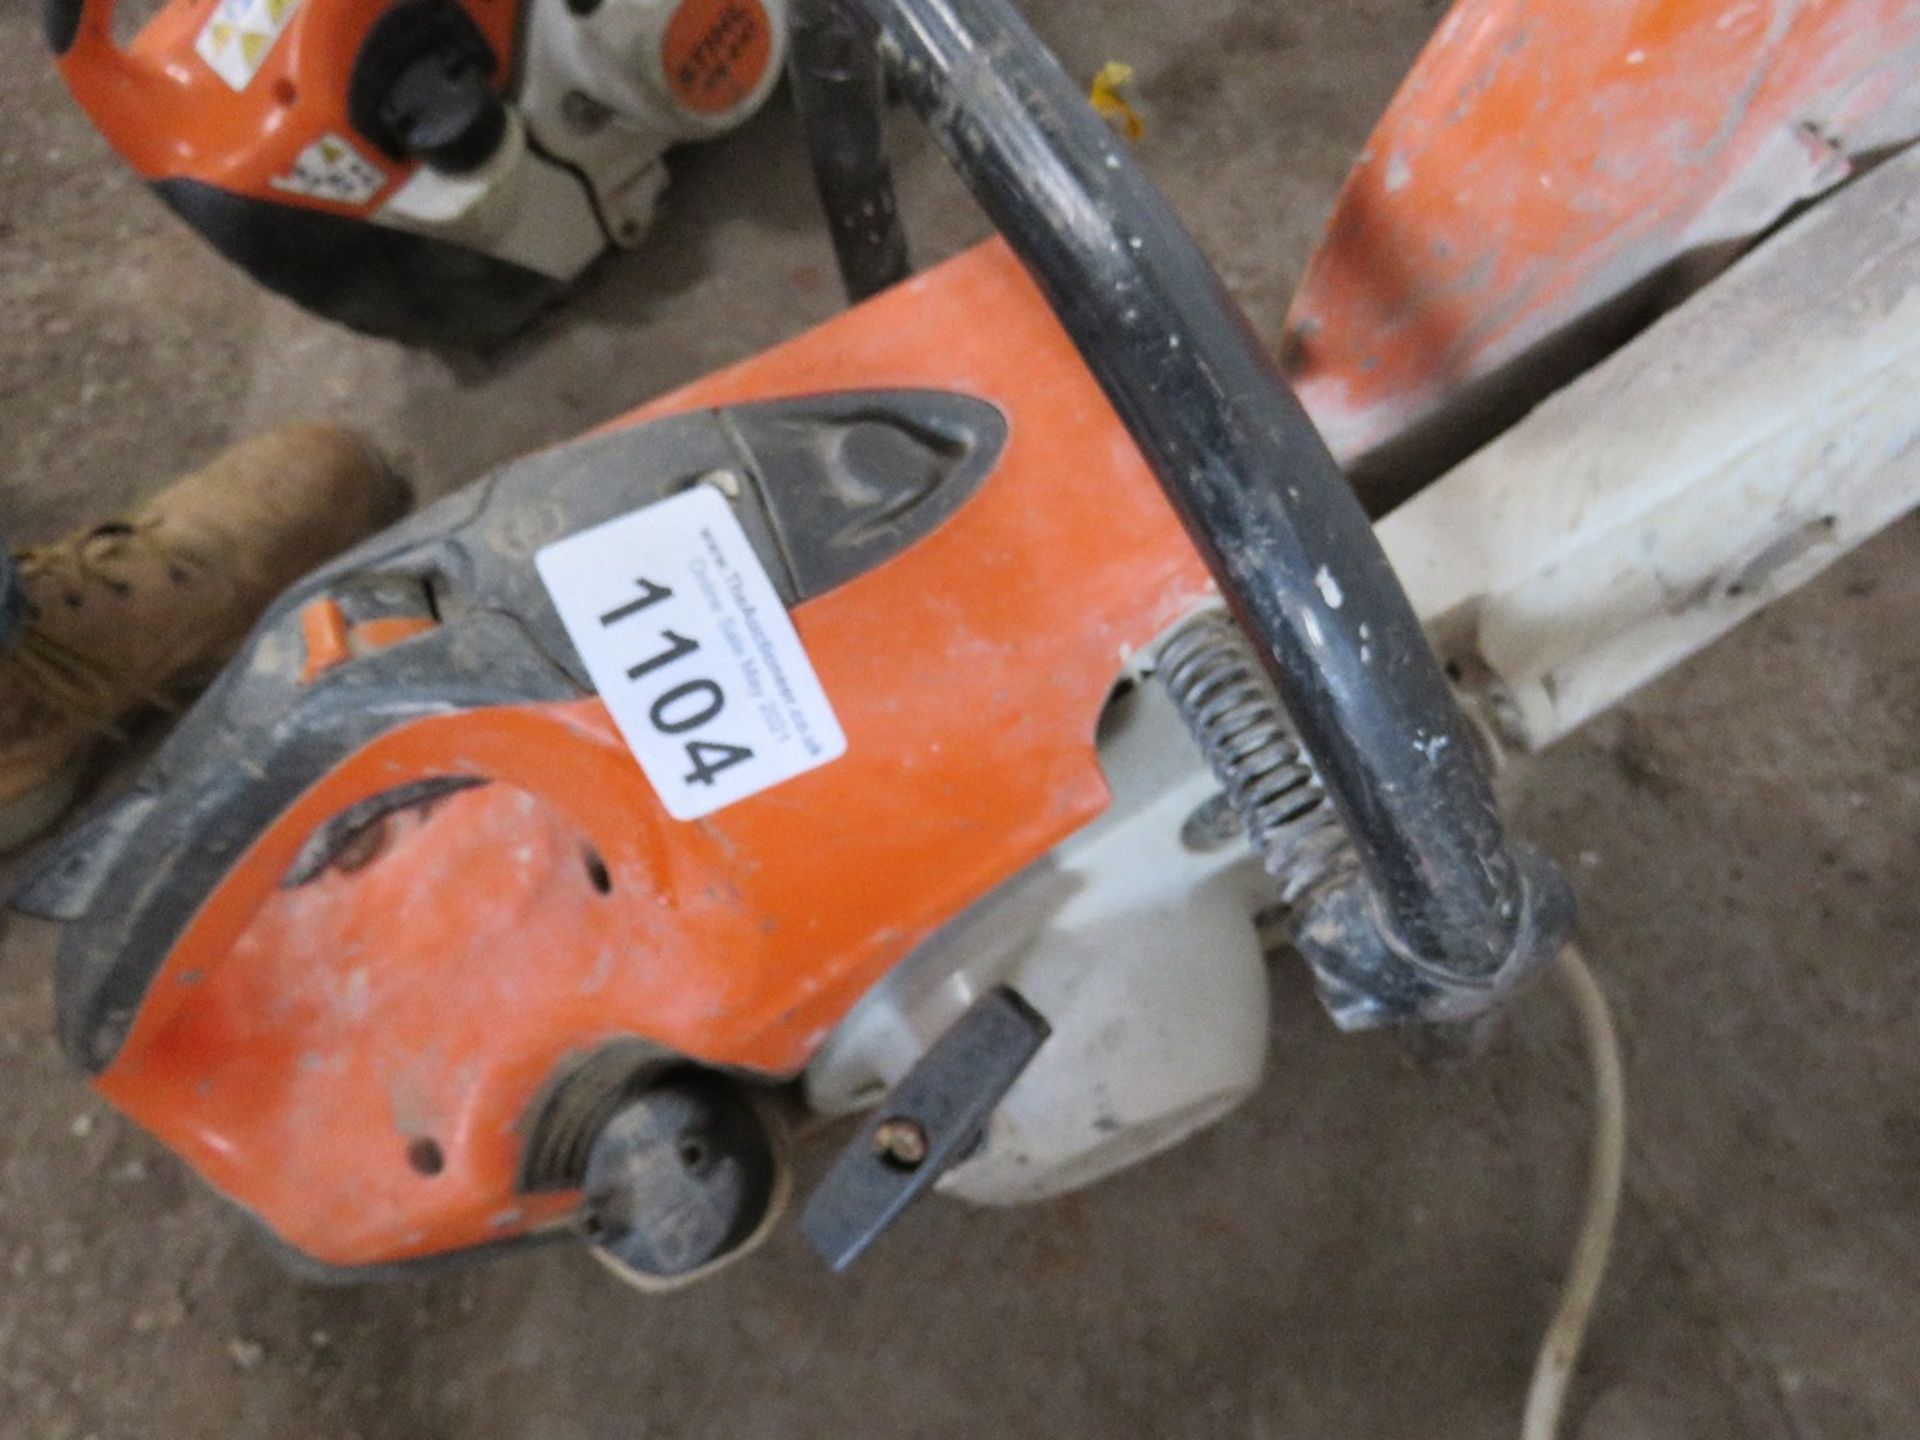 STIHL TS410 PETROL SAW, UNTESTED, CONDITION UNKNOWN. - Image 2 of 2